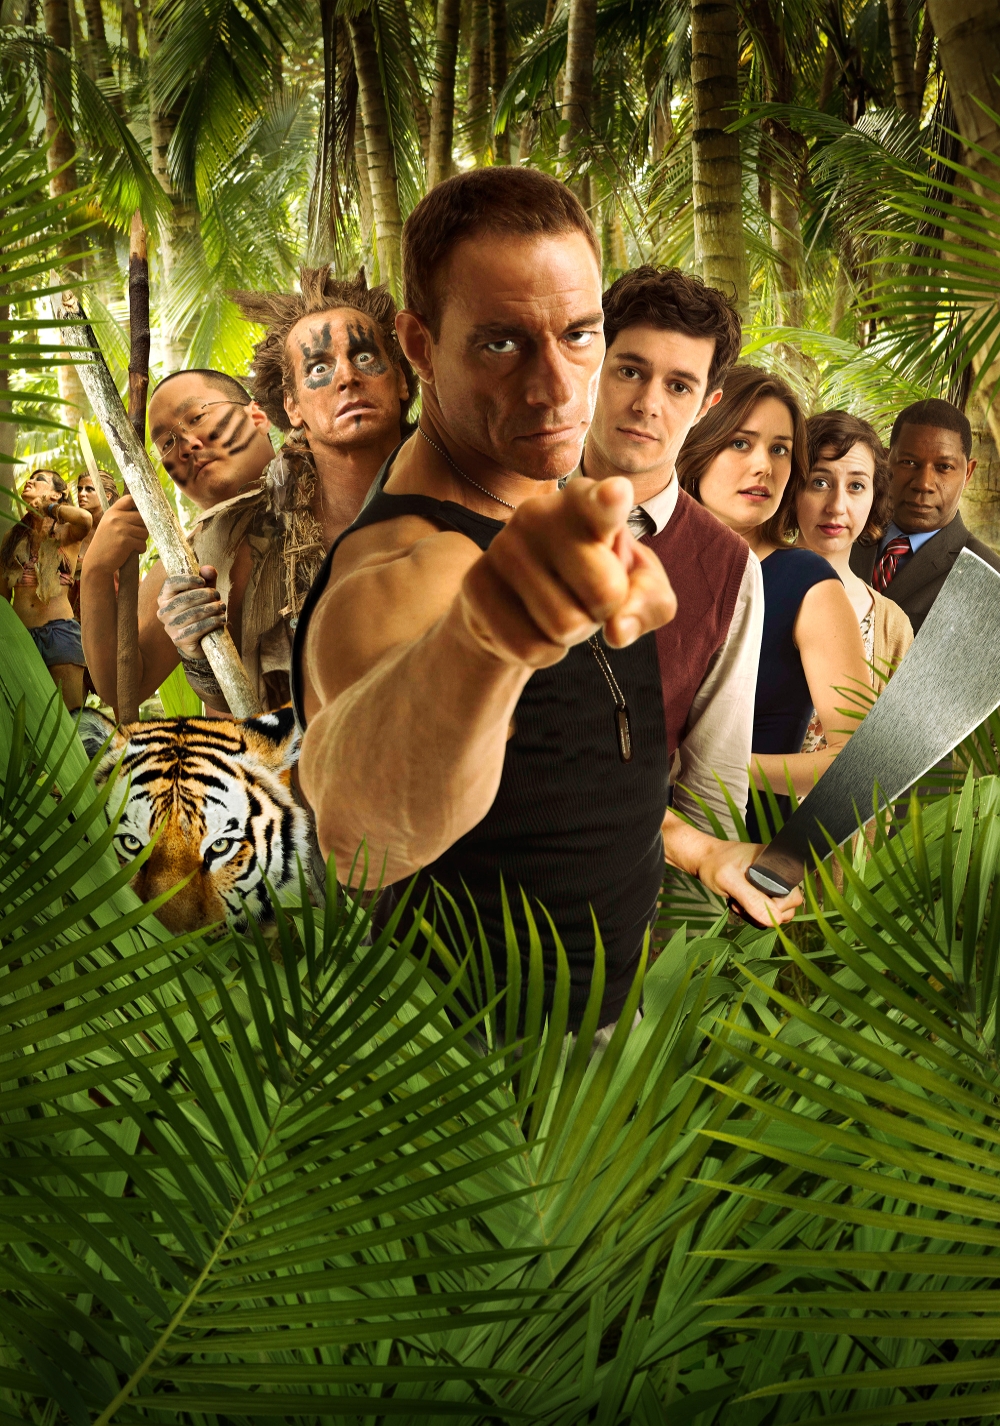 View, Download, Rate, and Comment on this Welcome To The Jungle Movie Poste...